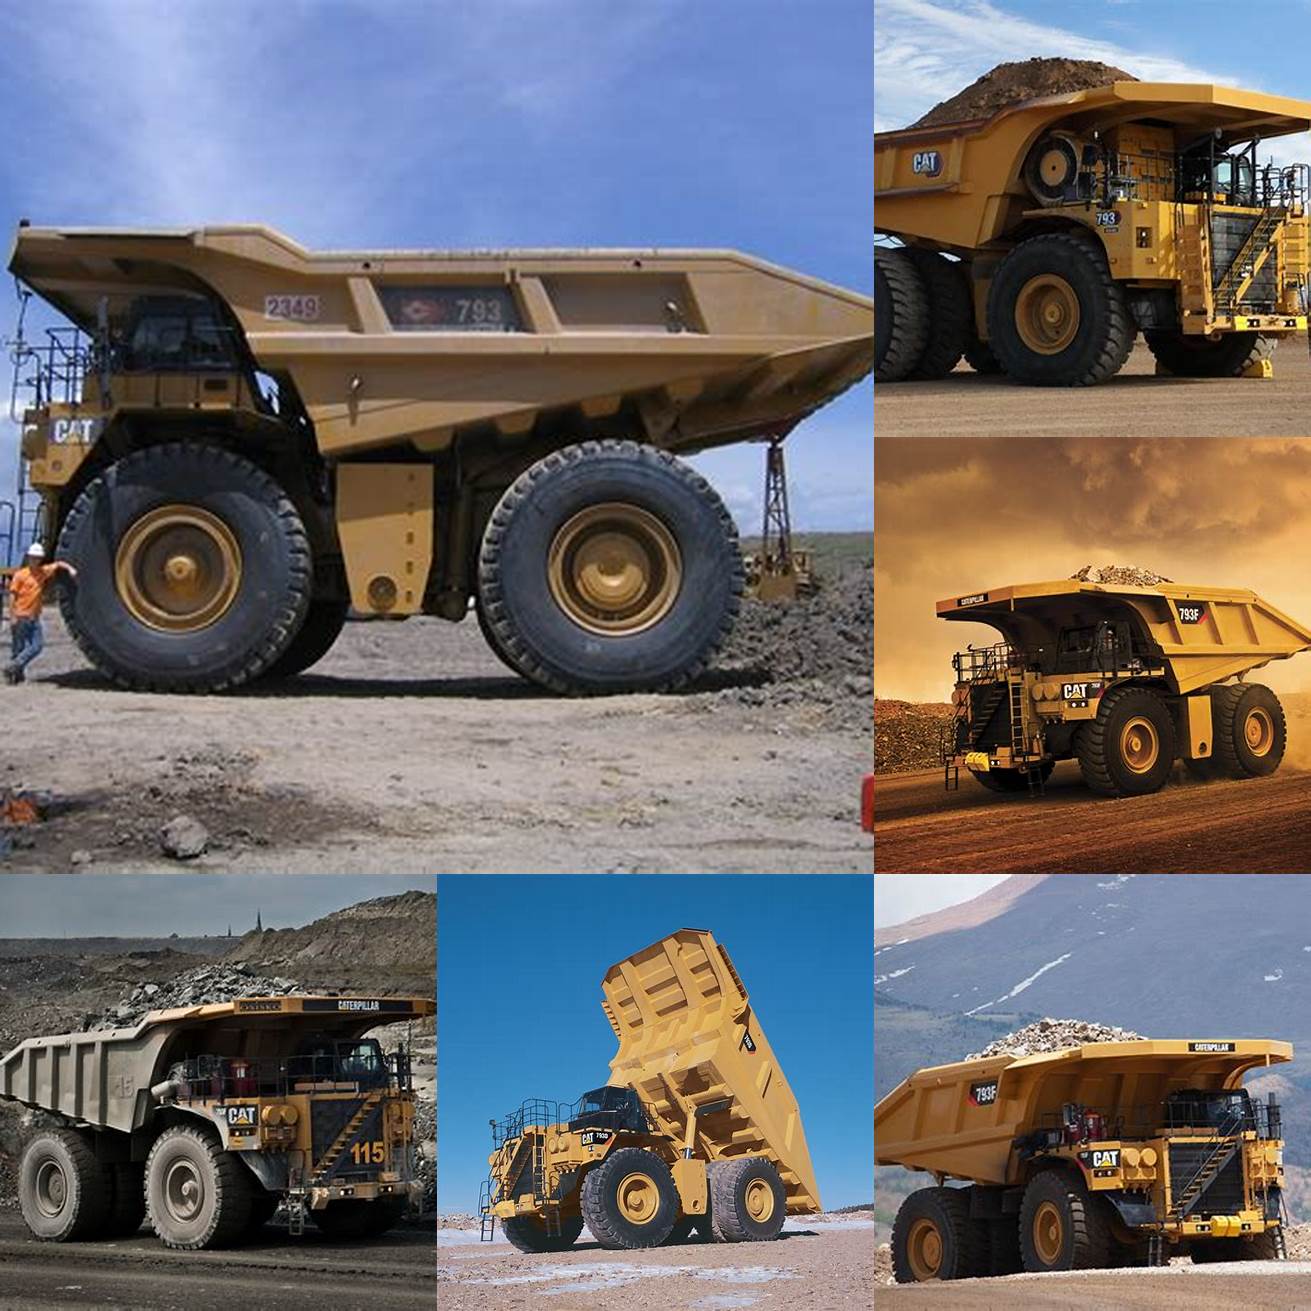 Q How much does a Cat 793 haul truck cost